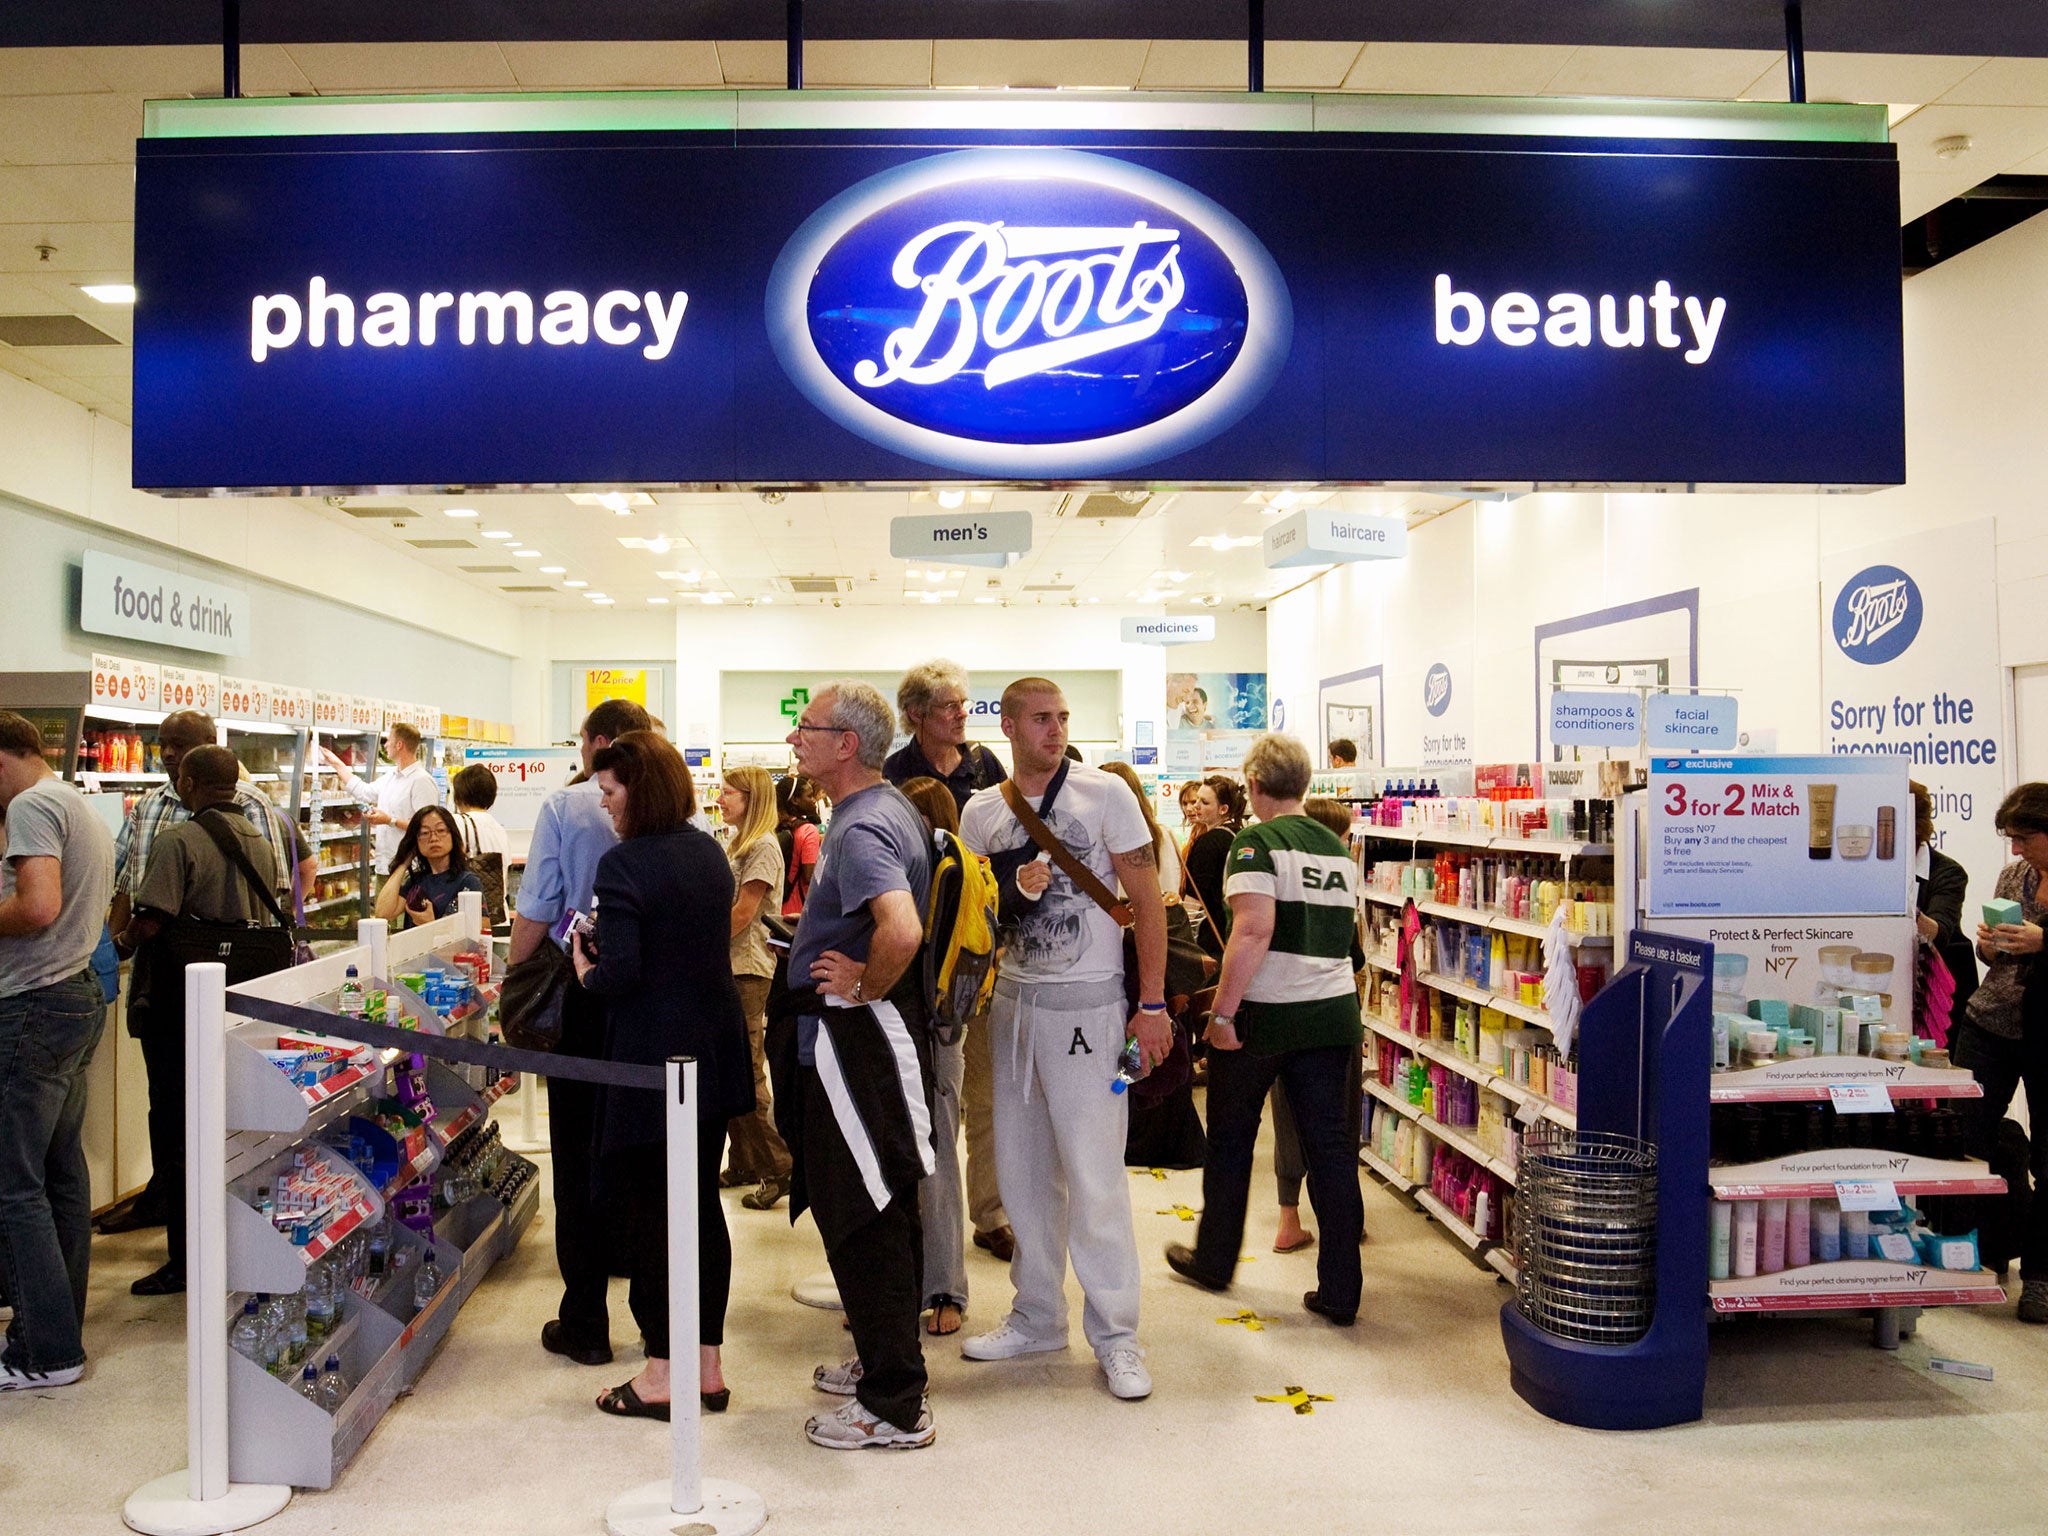 Customers at Boots stores such as the one at Terminal 3 at Heathrow airport have been asked for their passes